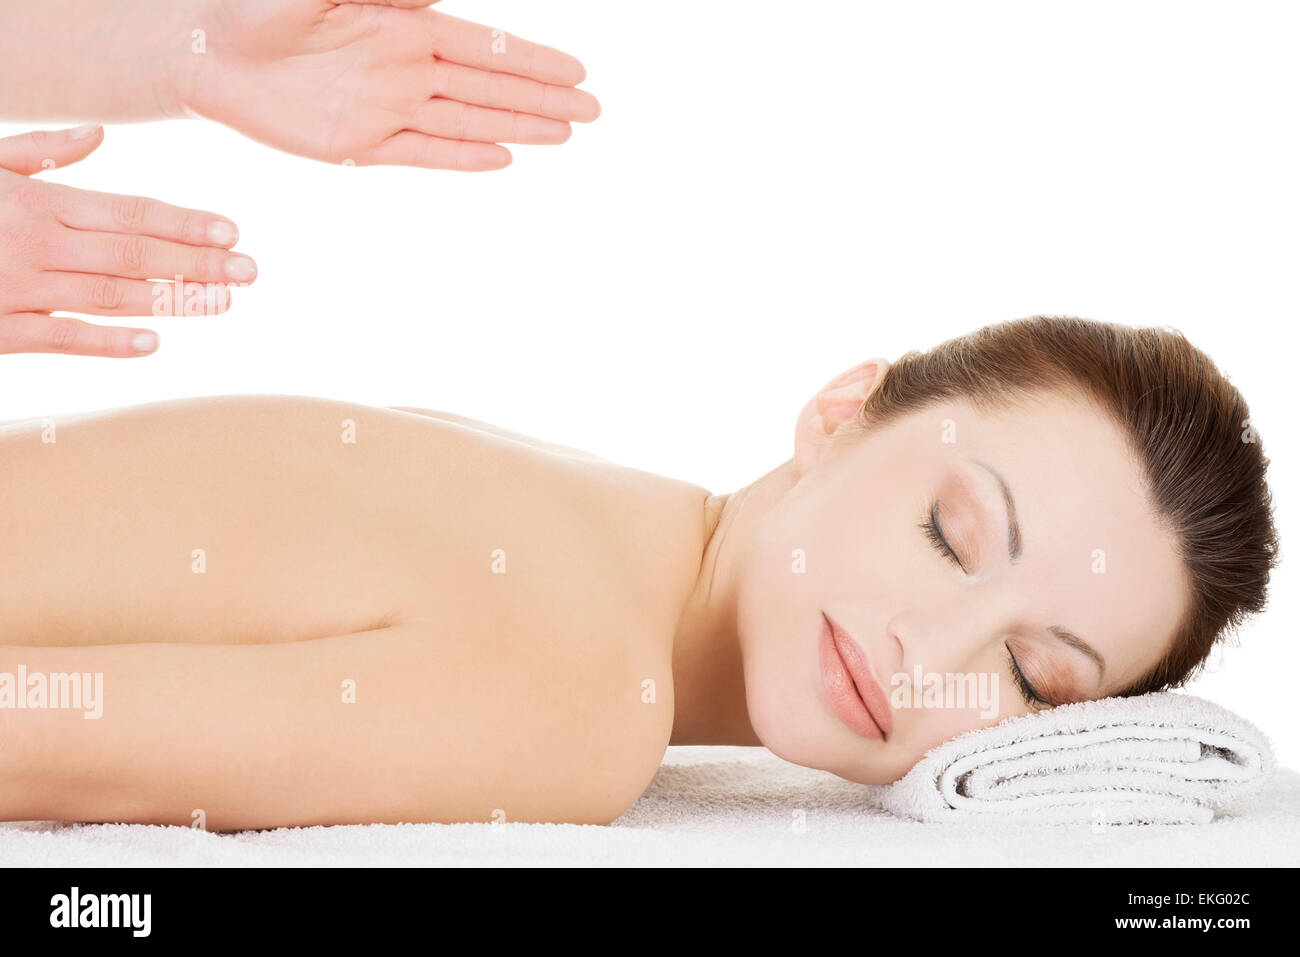 Preaty woman relaxing beeing massaged in spa Stock Photo